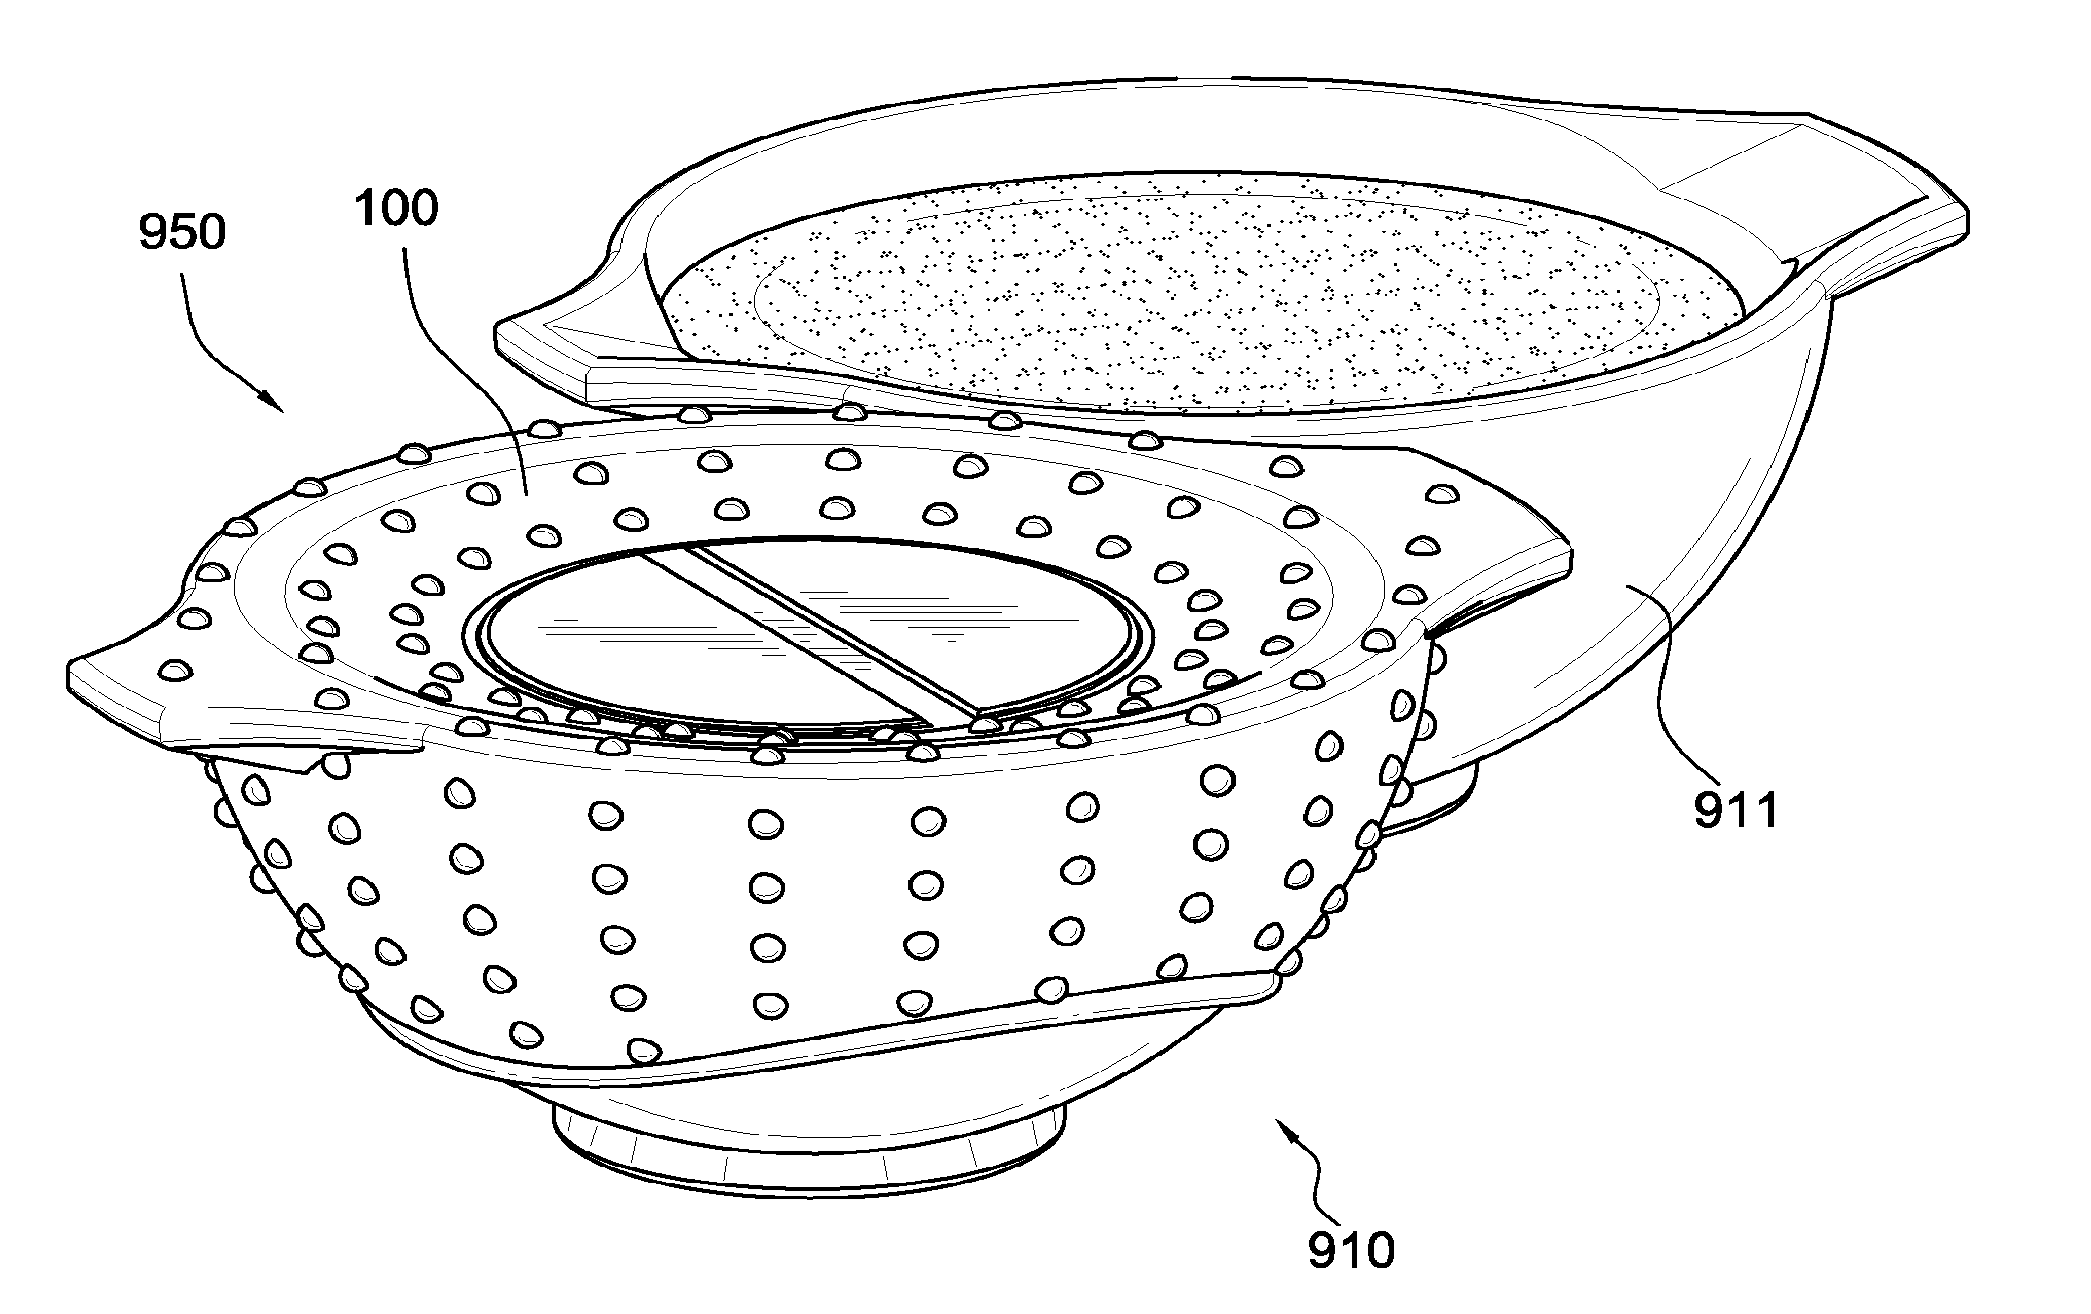 Adaptive cover for sealing multiple objects having irregular shapes and method of using and manufacturing the same